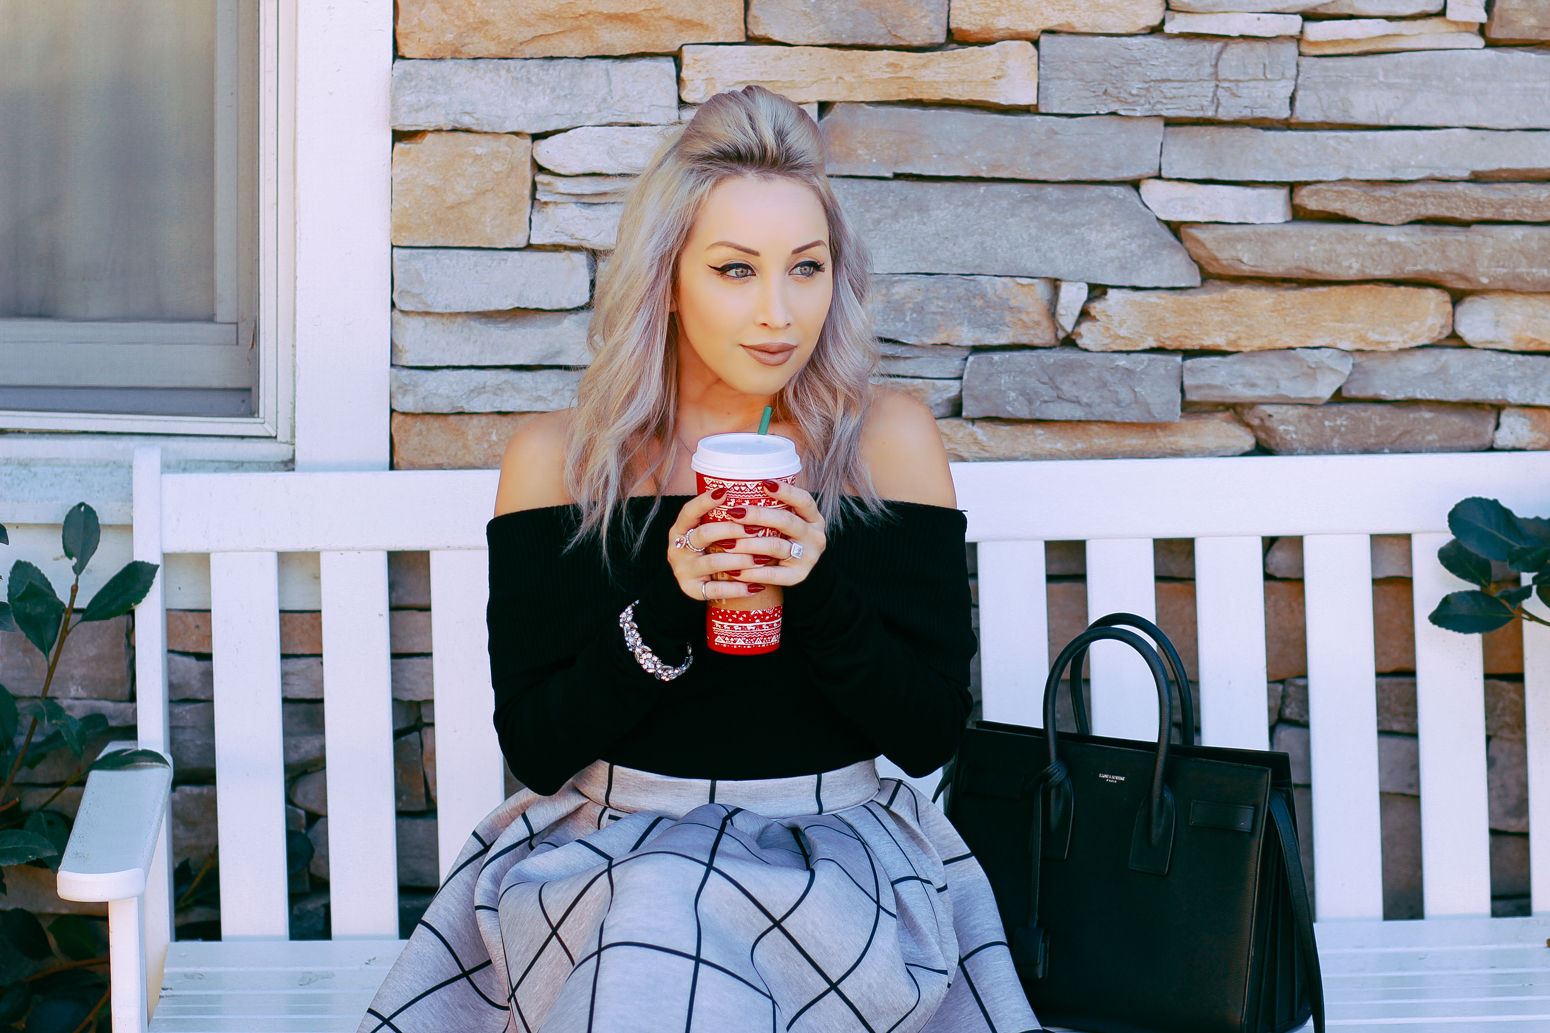 Blondie in the City | IG: @HayleyLarue | Grid Print Holiday Skirt | Holiday Outfit Inspiration